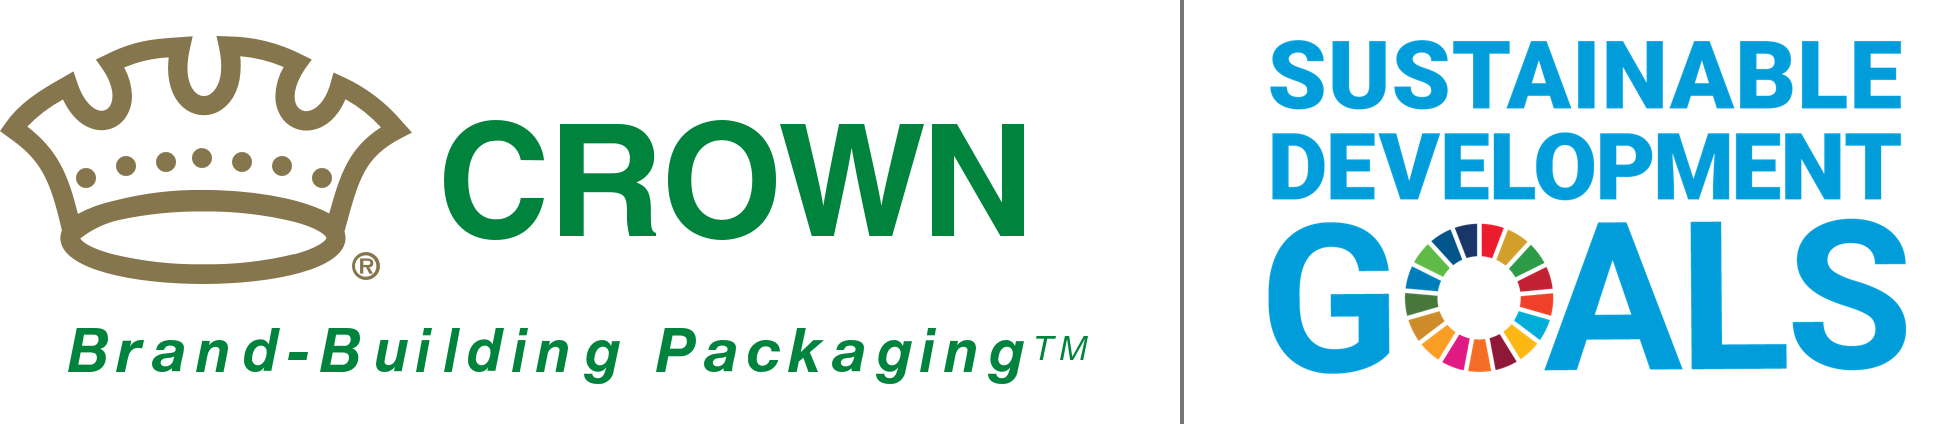 Crown: Brand-Building Packaging Sustainable Development Goals